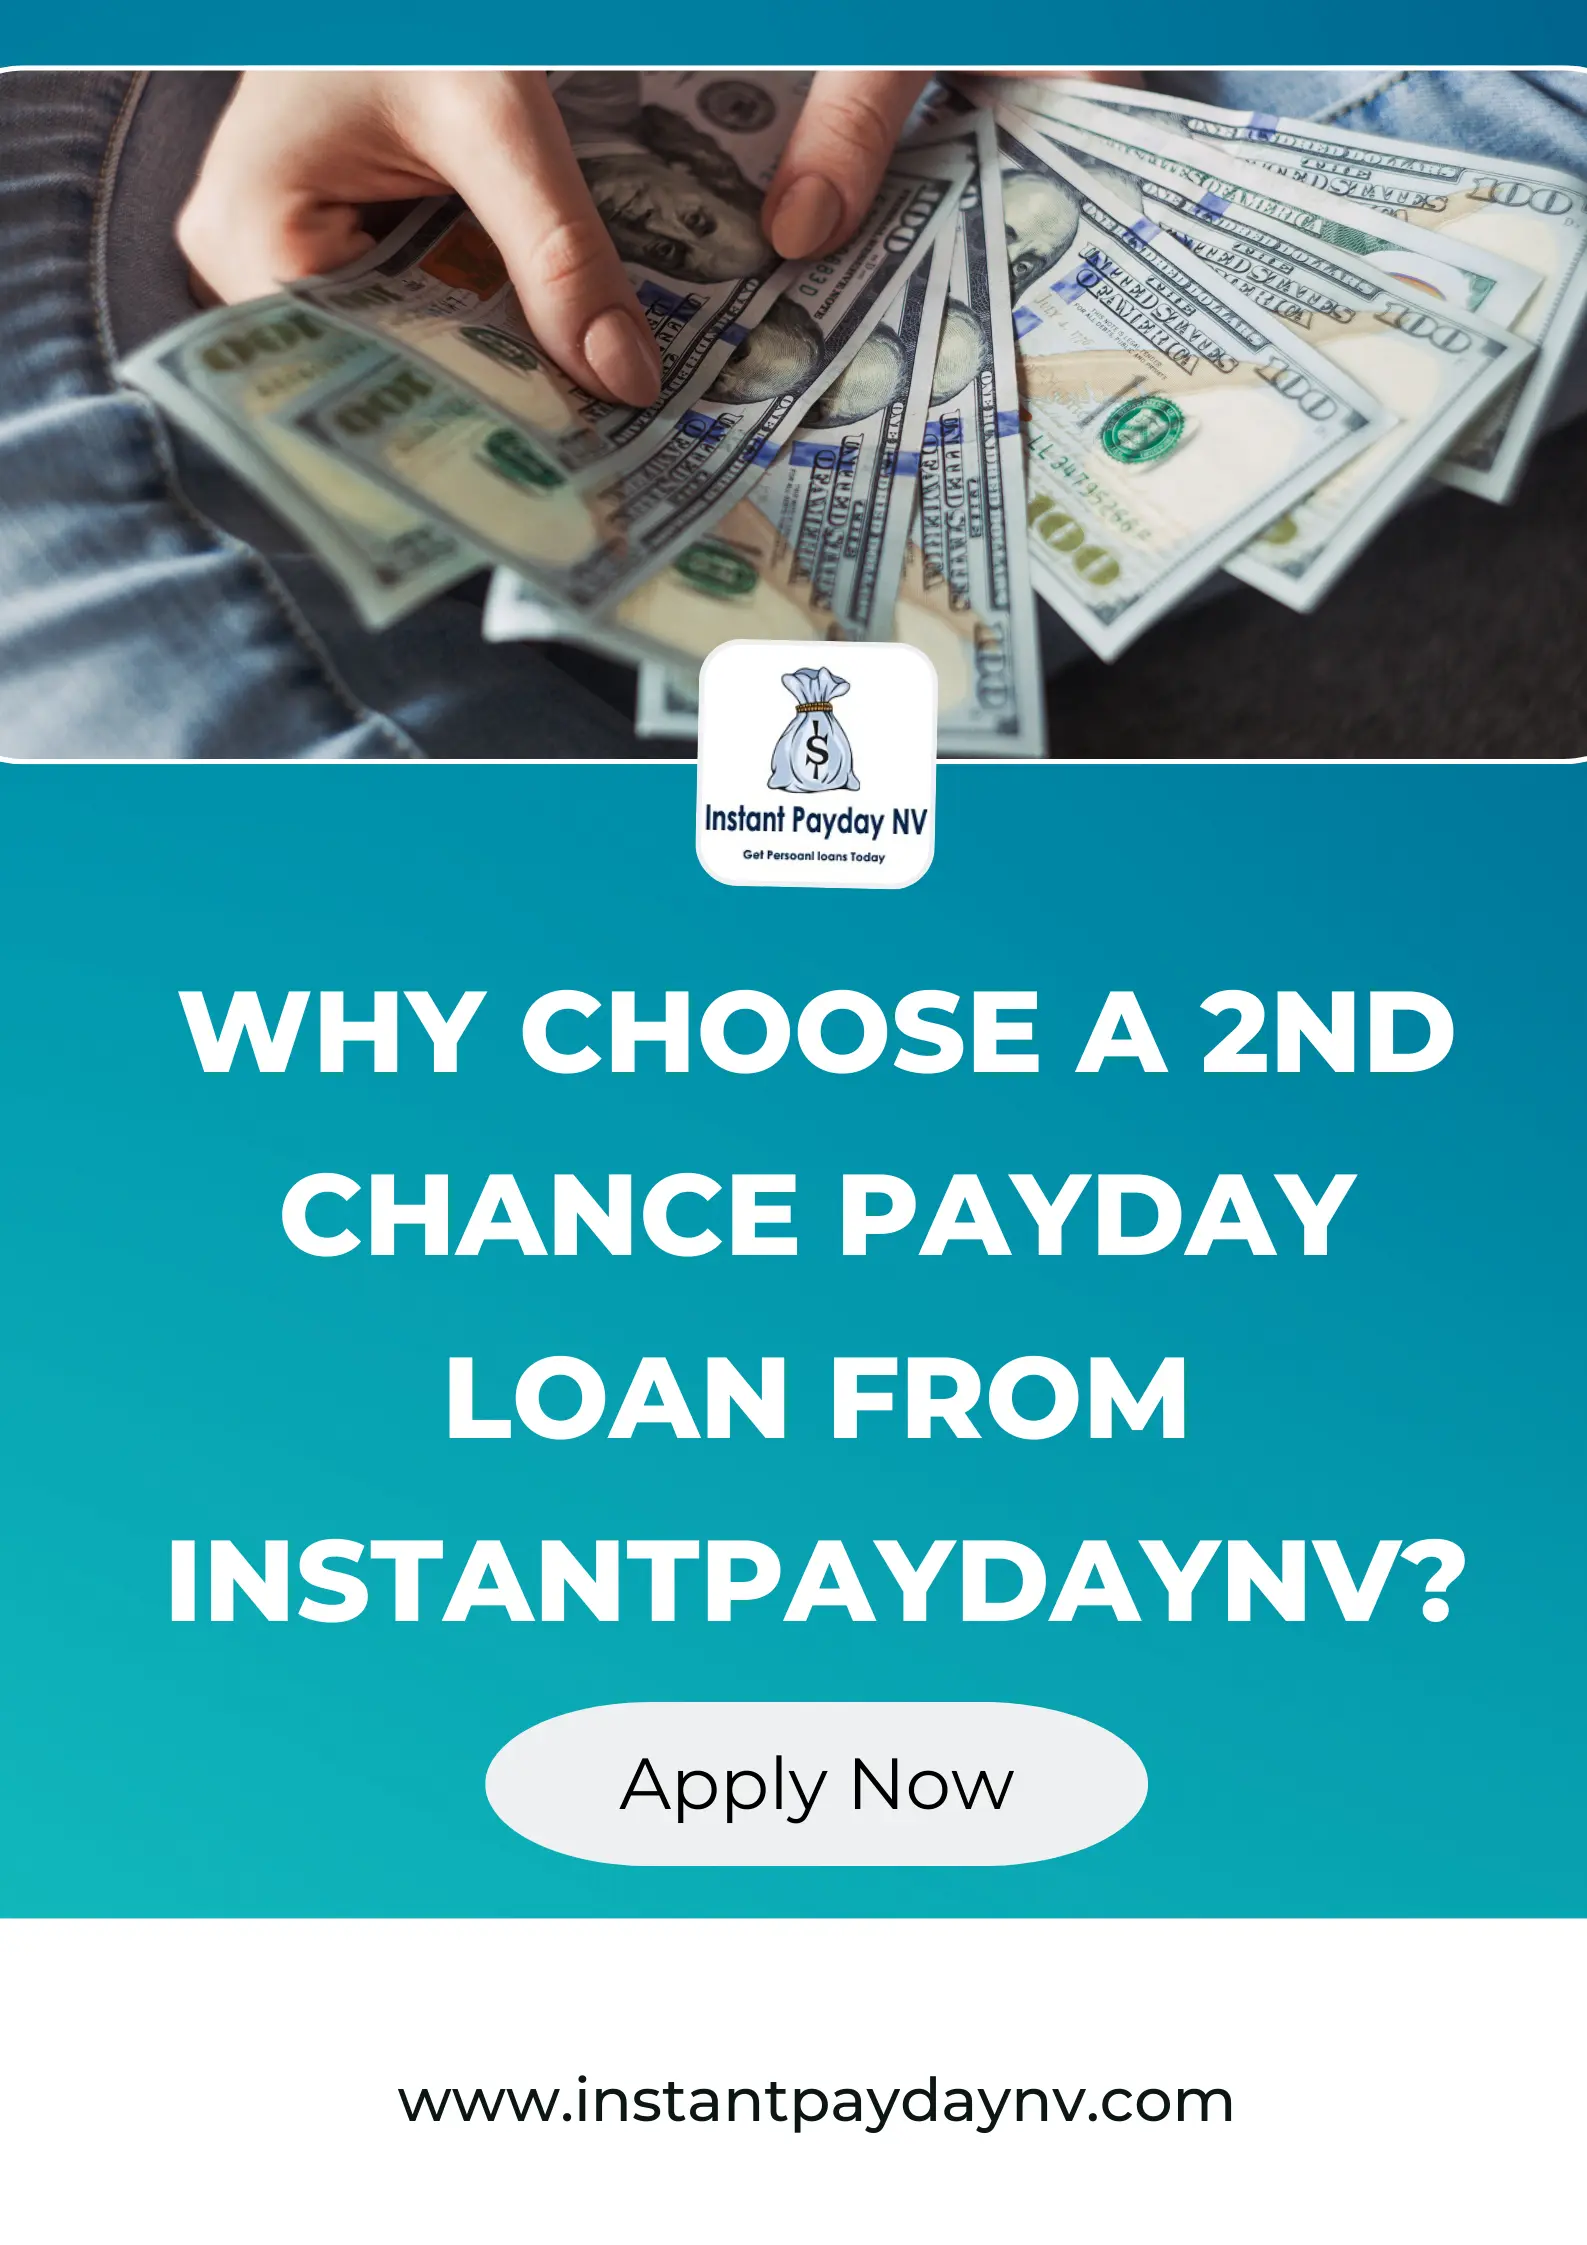 Why Choose a 2nd Chance Payday Loan from InstantPaydayNV